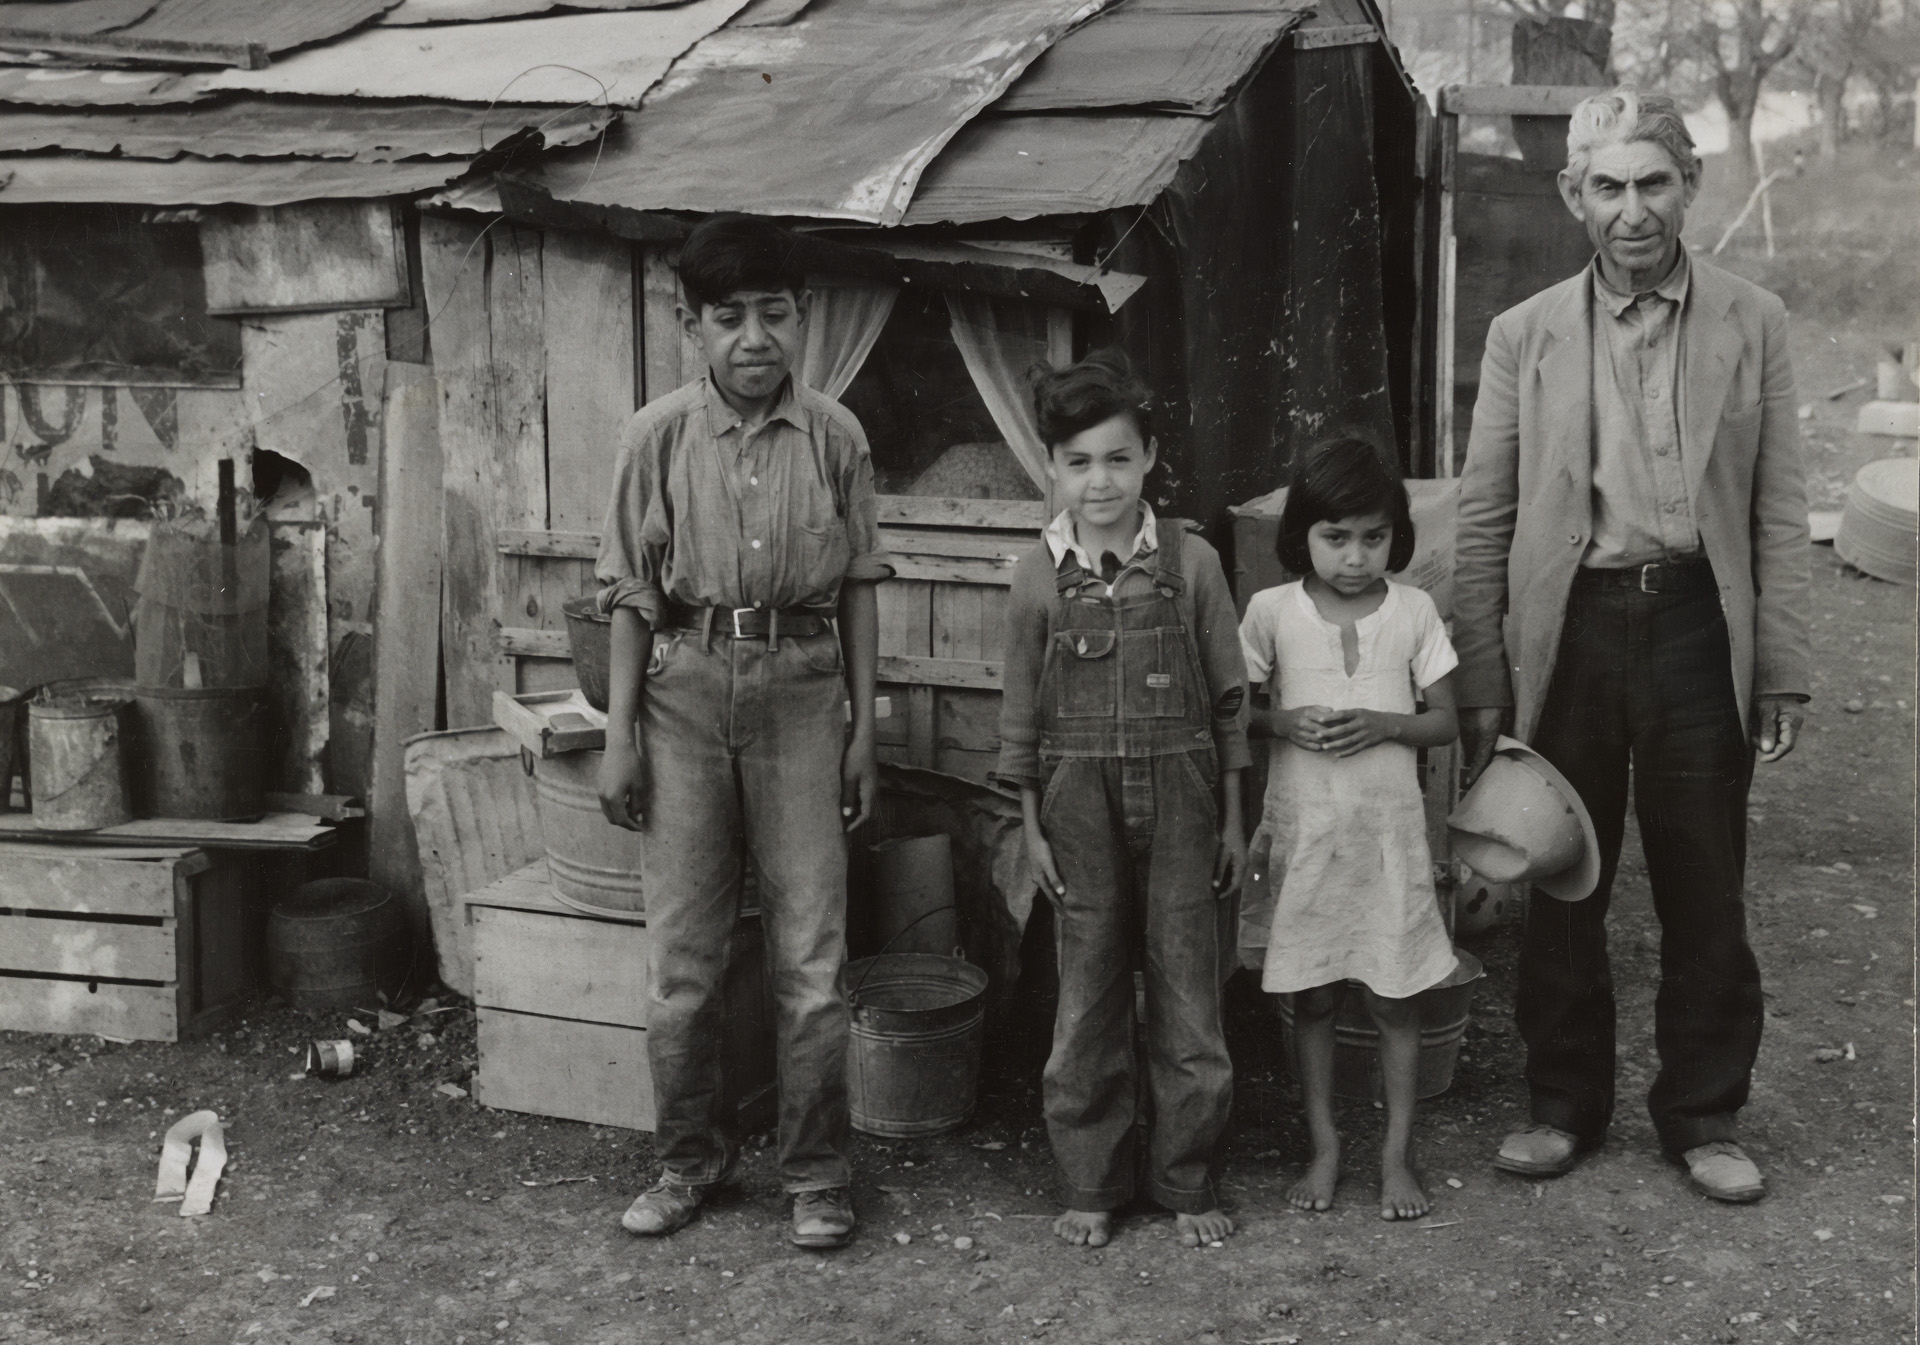 Senor Vigues and three of his five children outside of their homemade shack home opposite Santa Rita Courts, an early segregated public housing project. Located in Austin, Texas the project was one of the first to be completed under the Housing Act of 1937 and was constructed for Mexican American families.